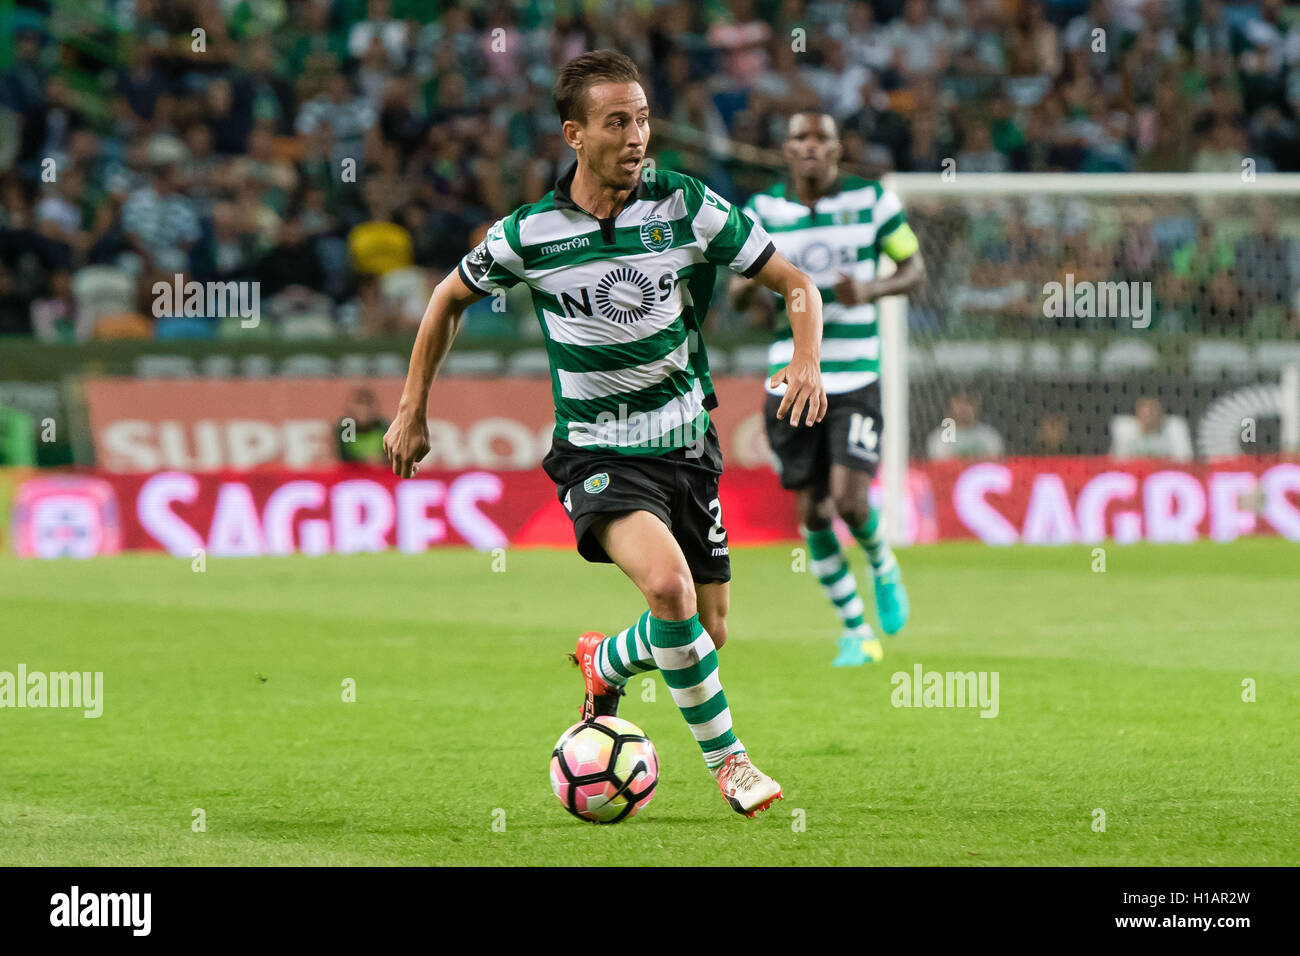 Portugal, Lisbon, Sep. 23, 2016 - PORTUGUESE FOOTBALL - João Pereira in action during Portuguese First League match between Sporting and Estoril at Alvalade XXI Stadium, in Lisbon, Portugal. Credit:  Bruno de Carvalho/Alamy Live News Stock Photo